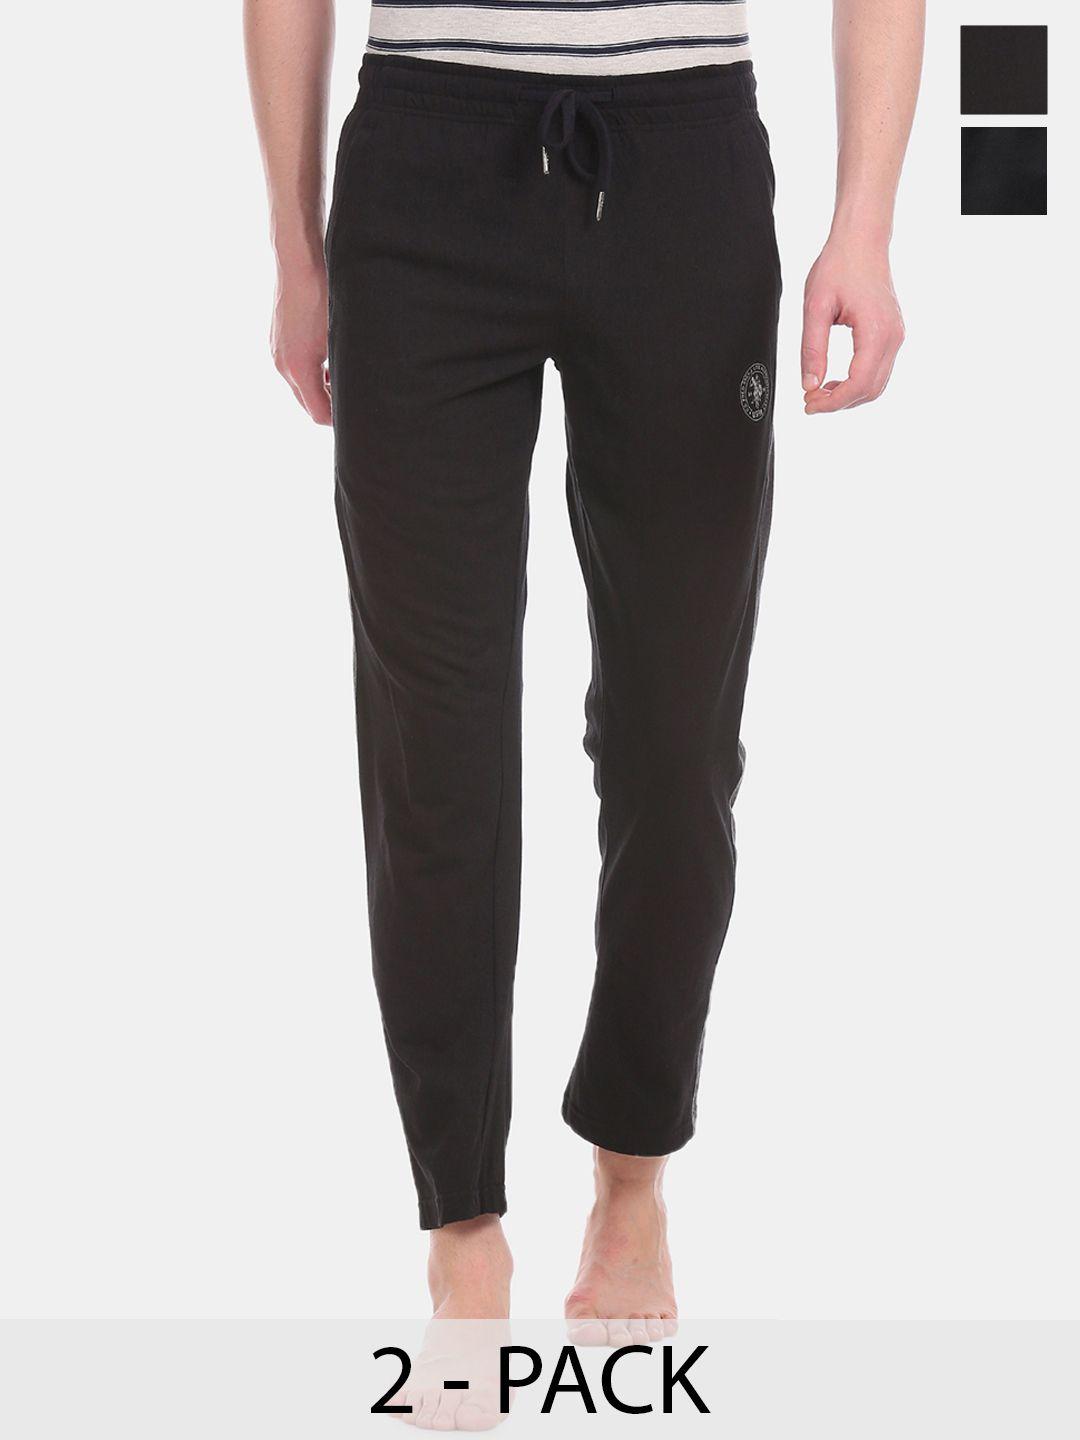 u.s. polo assn. pack of 2 mid-rise lounge pants